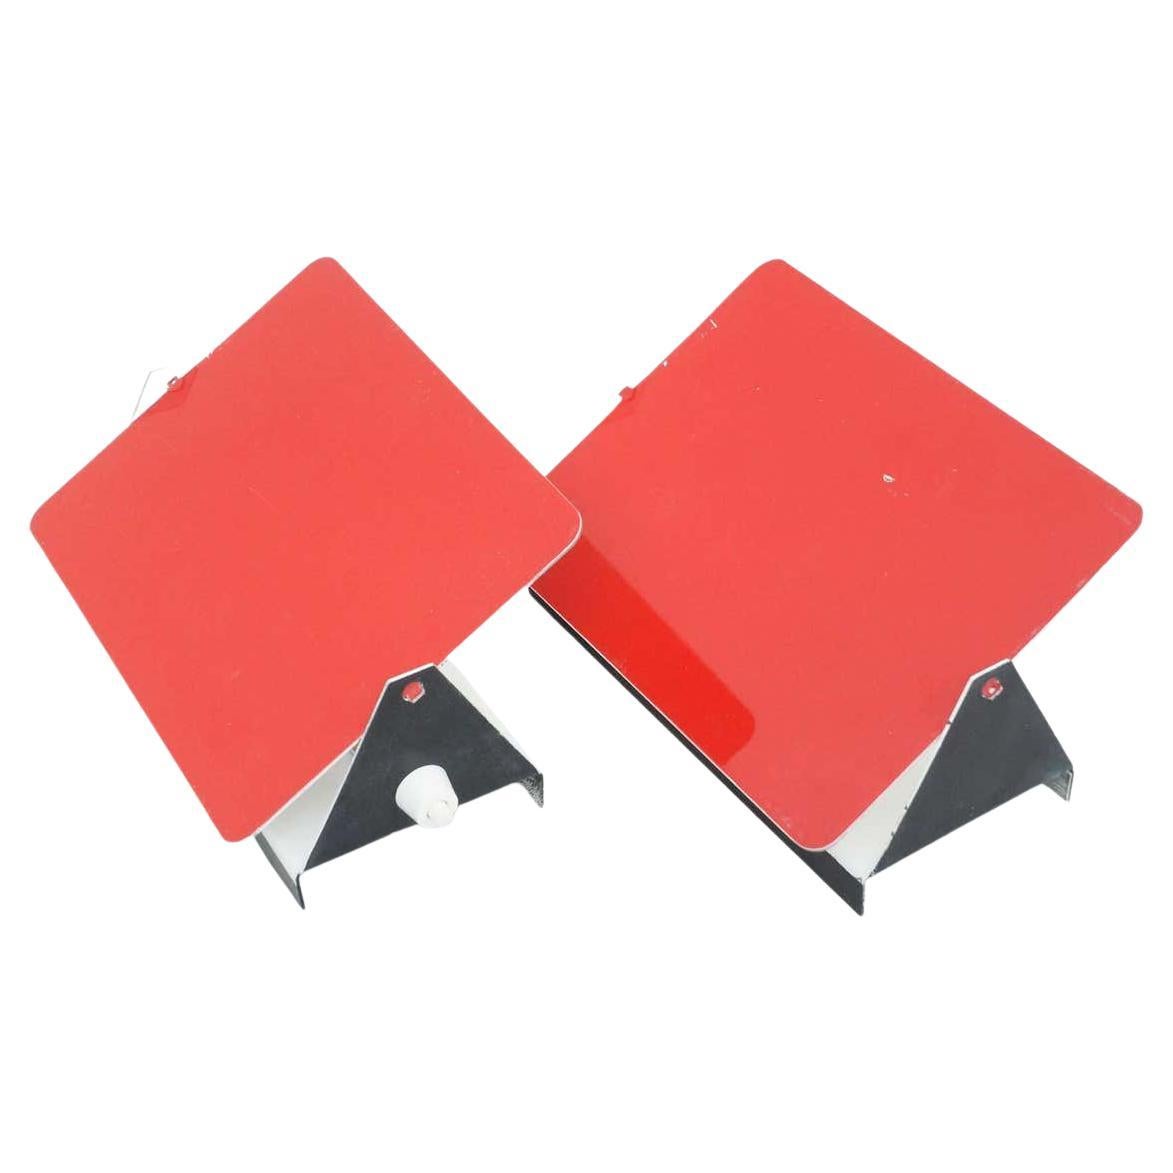 Pair of Charlotte Perriand, Mid-Century Modern Red Metal Cp-1 Wall Light, 1960 For Sale